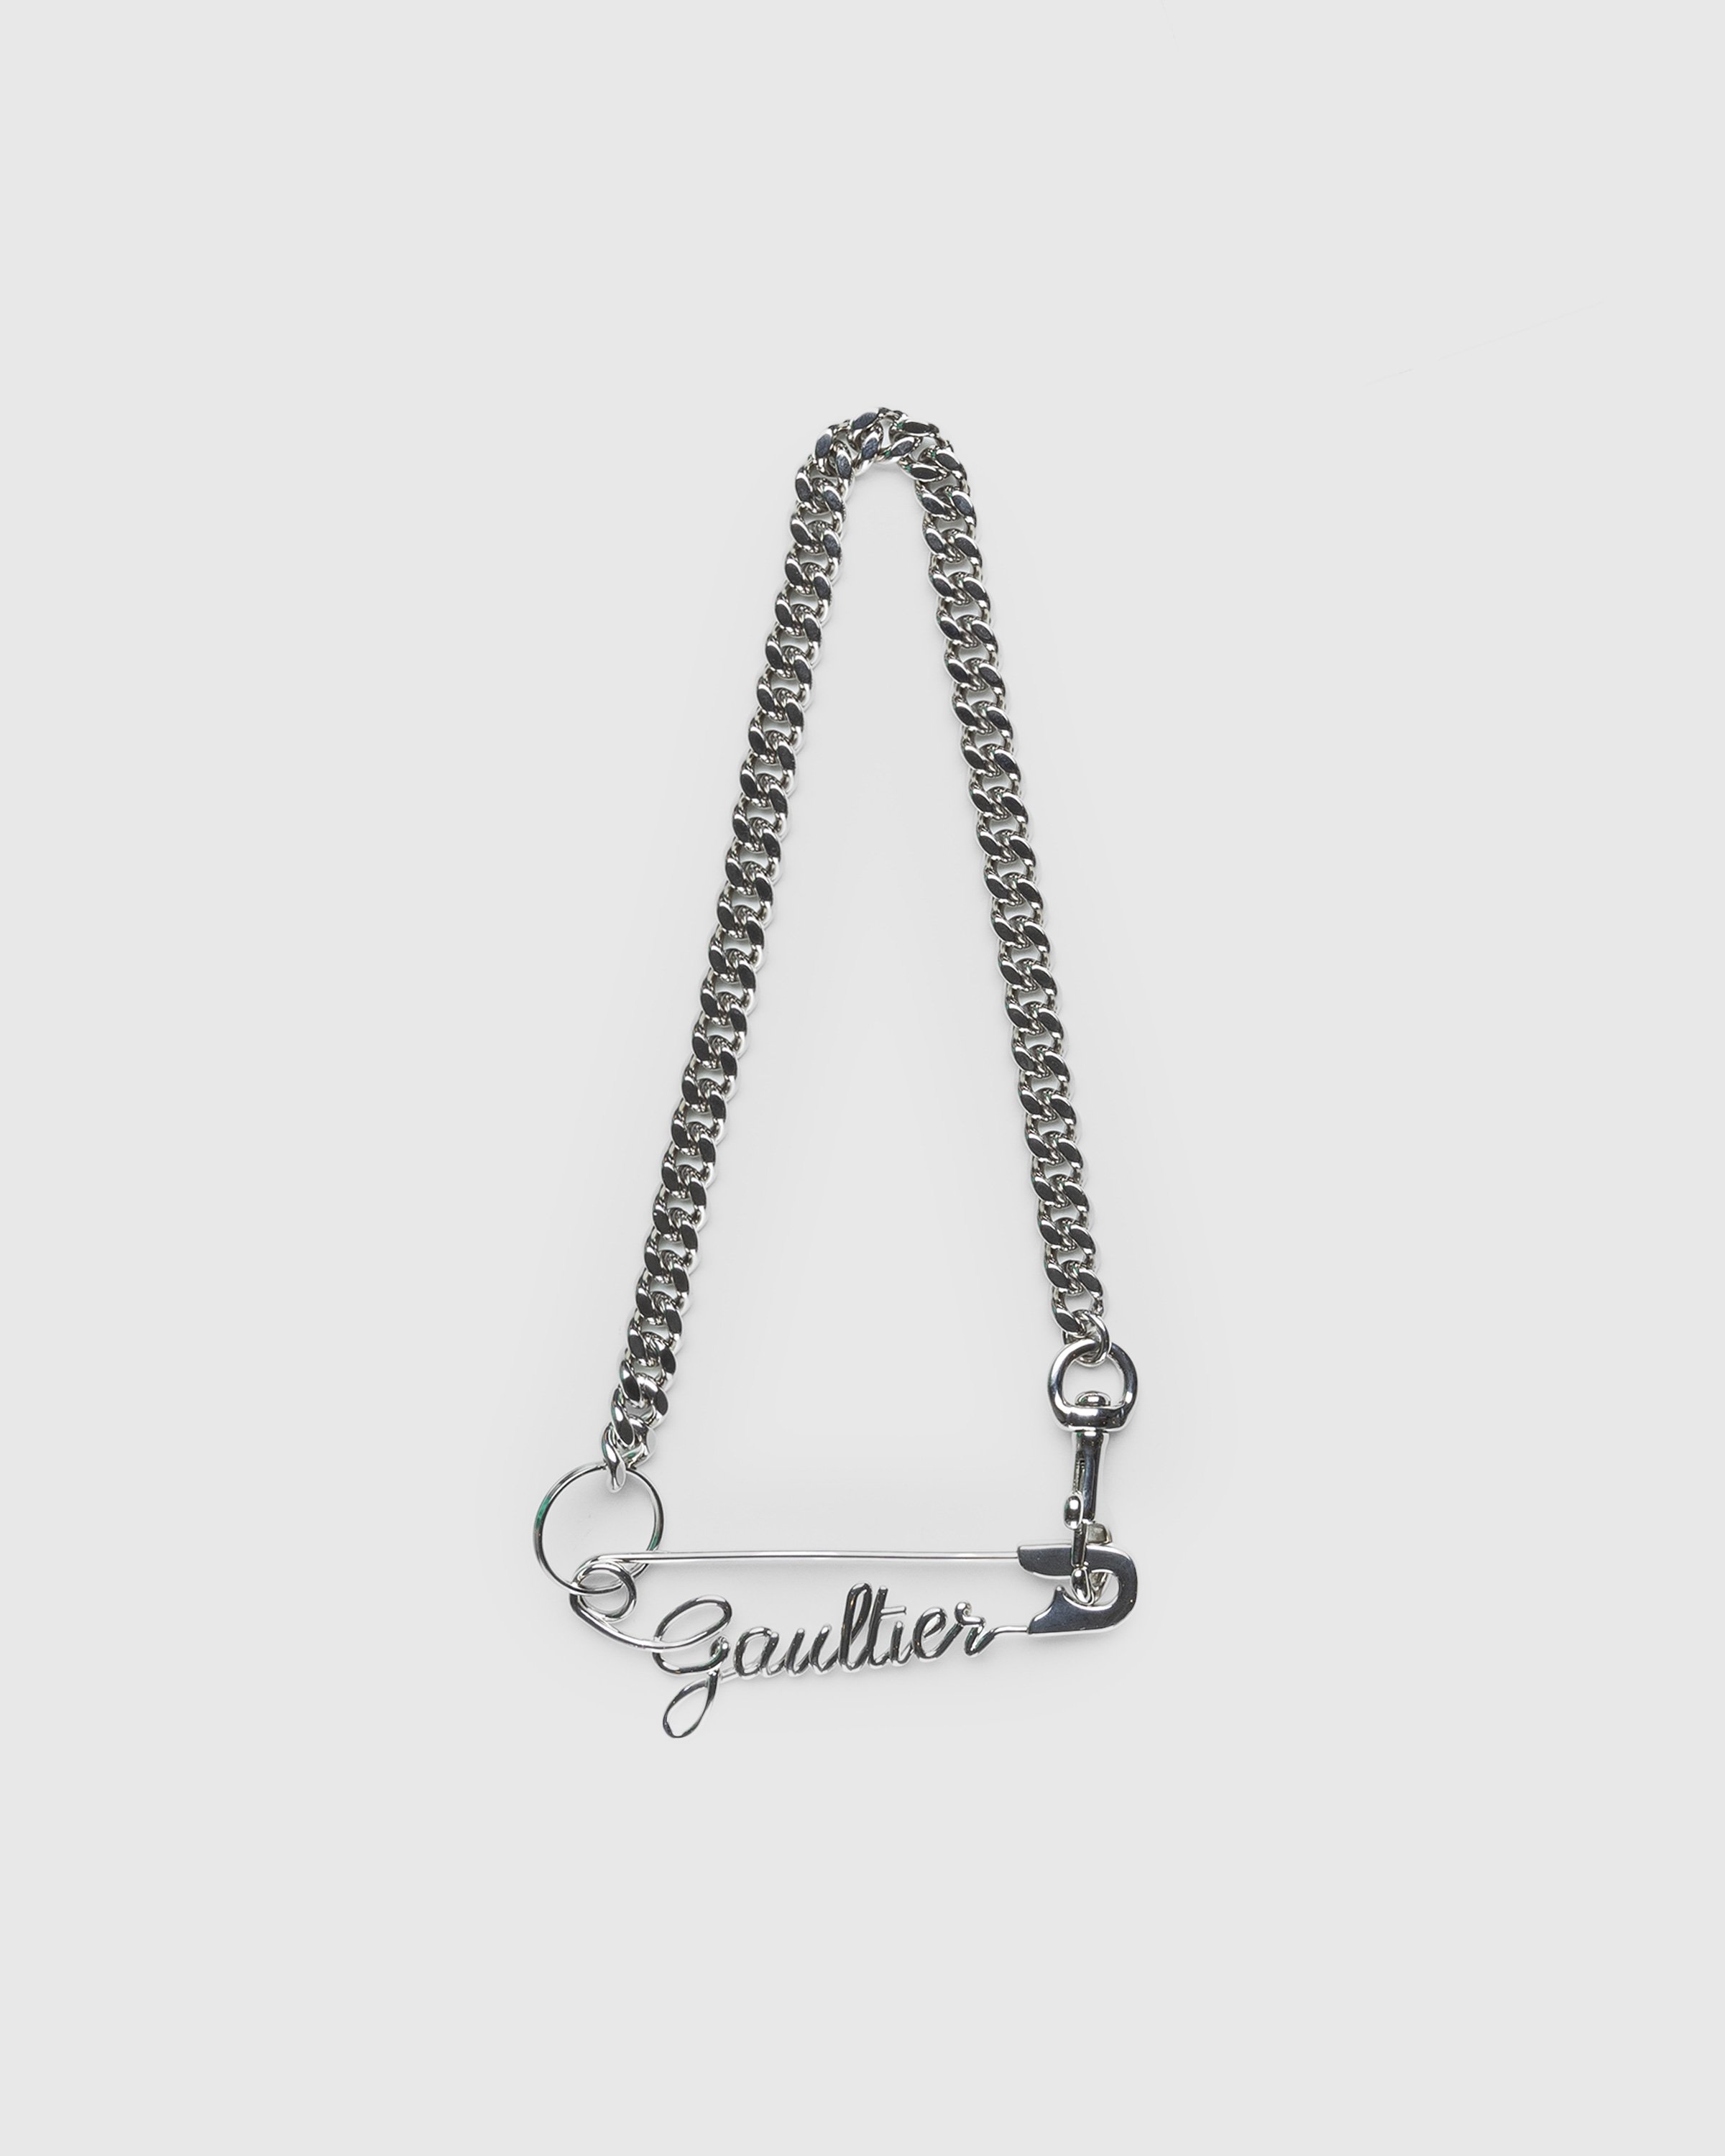 Jean Paul Gaultier - Safety Pin Gaultier Necklace Silver - Accessories - Silver - Image 1